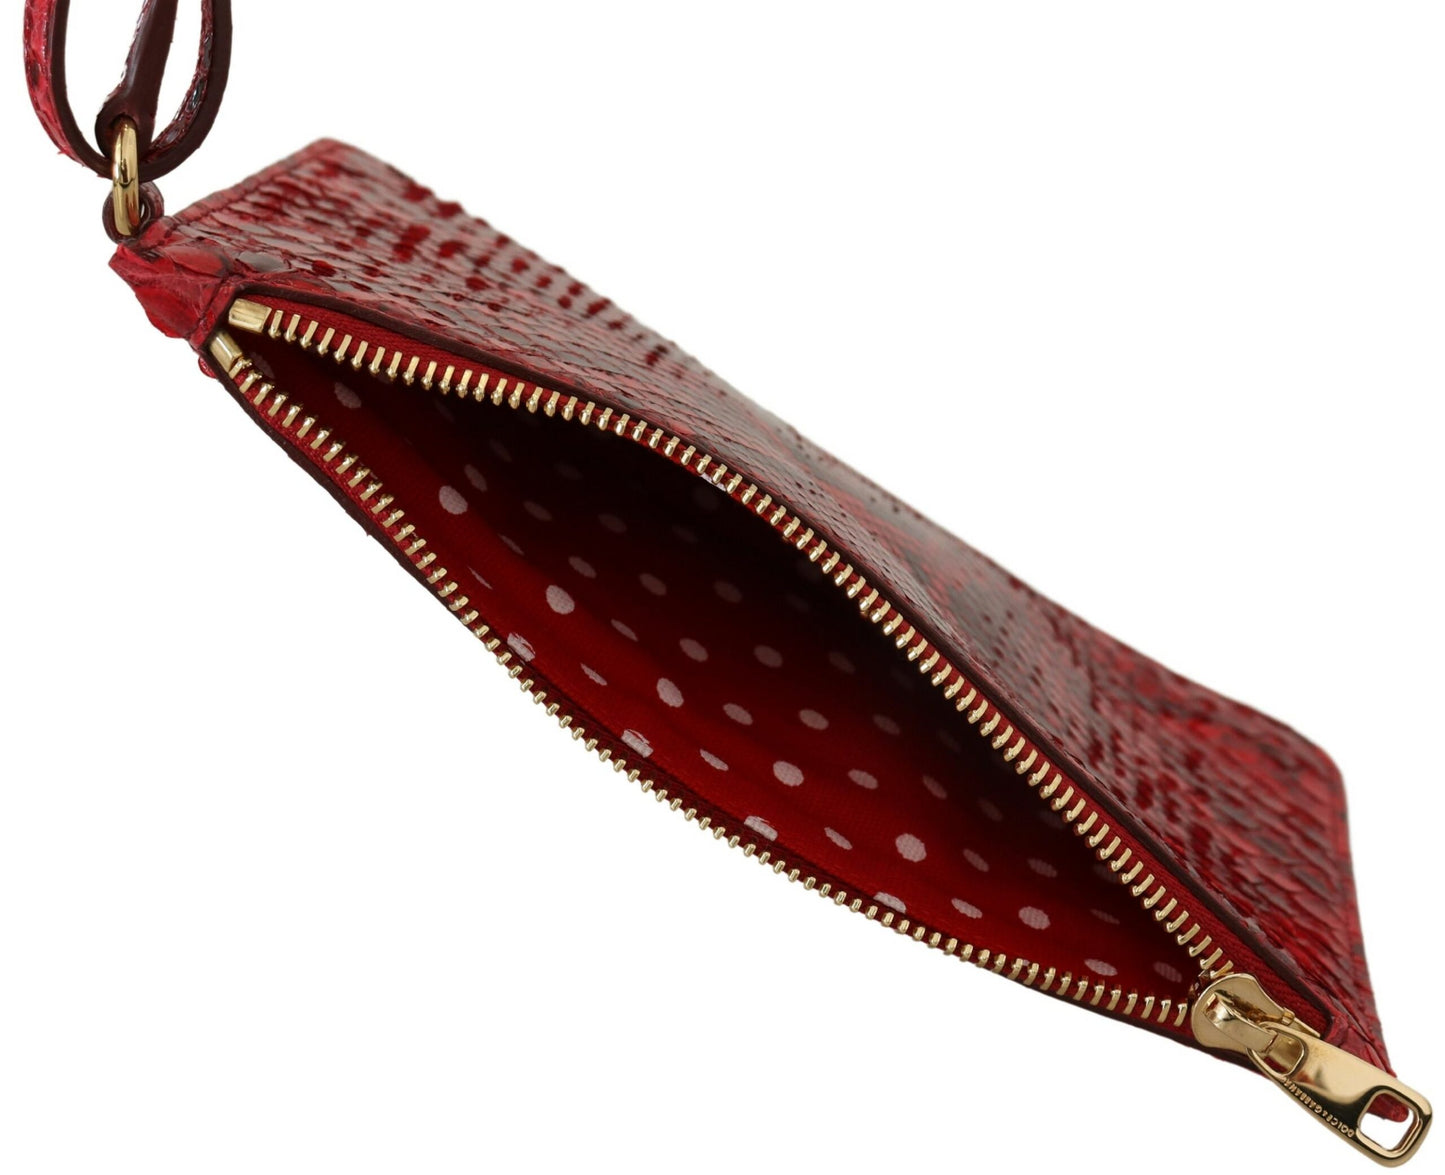 Dolce & gabbana red leather ayers snake clutch